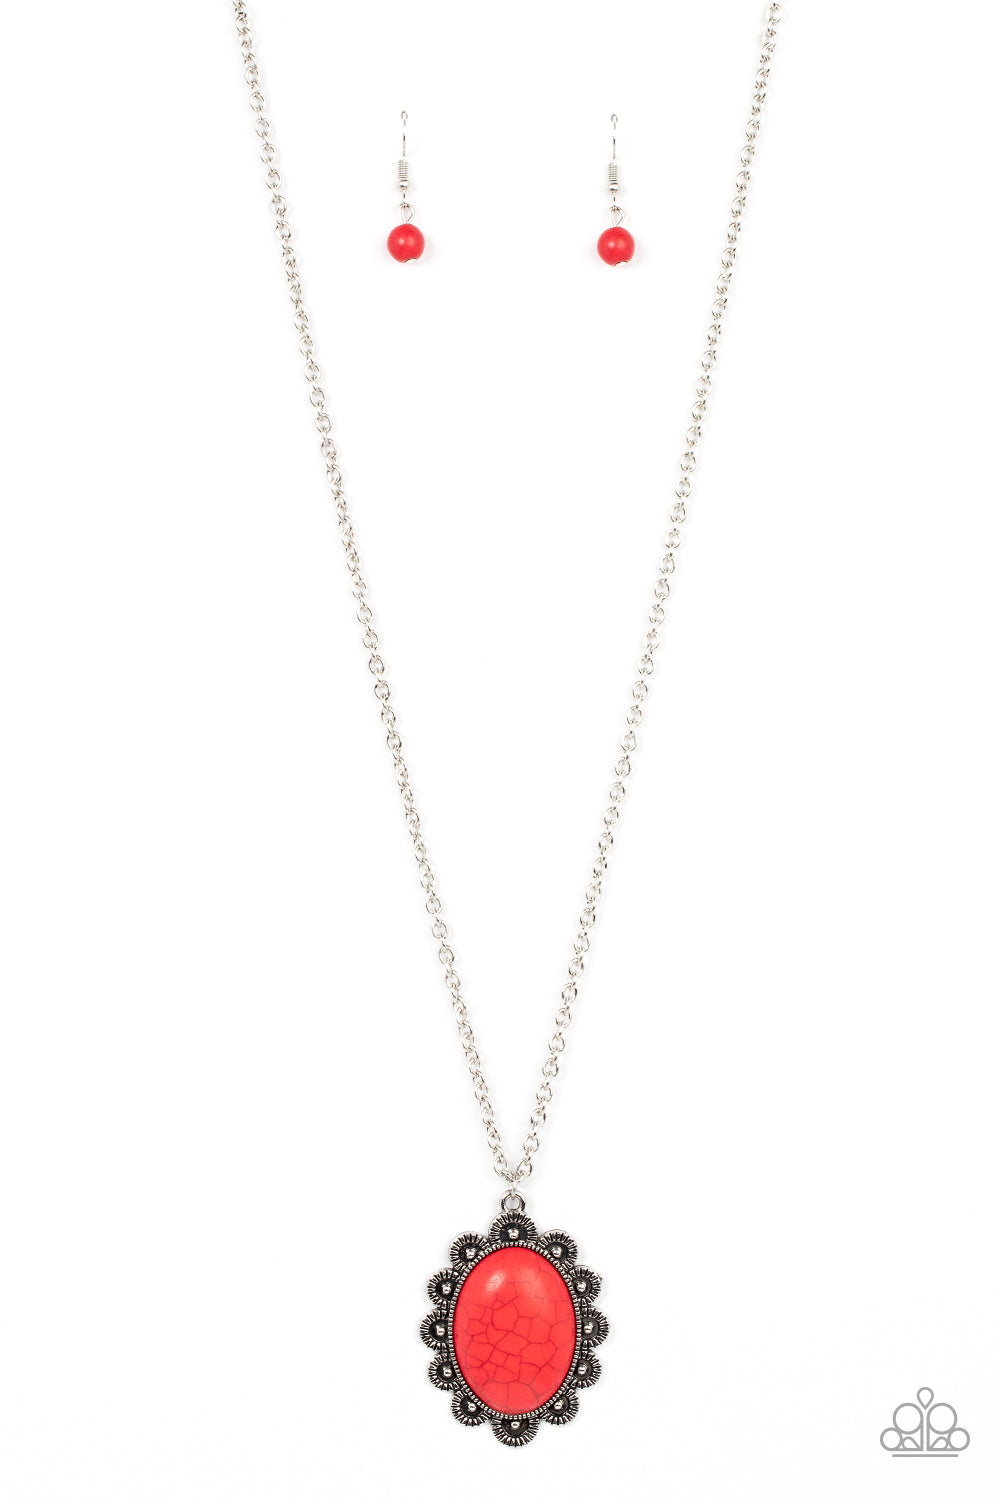 Paparazzi Daisy Dotted Deserts Red Long Necklace - P2SE-RDXX-320XX